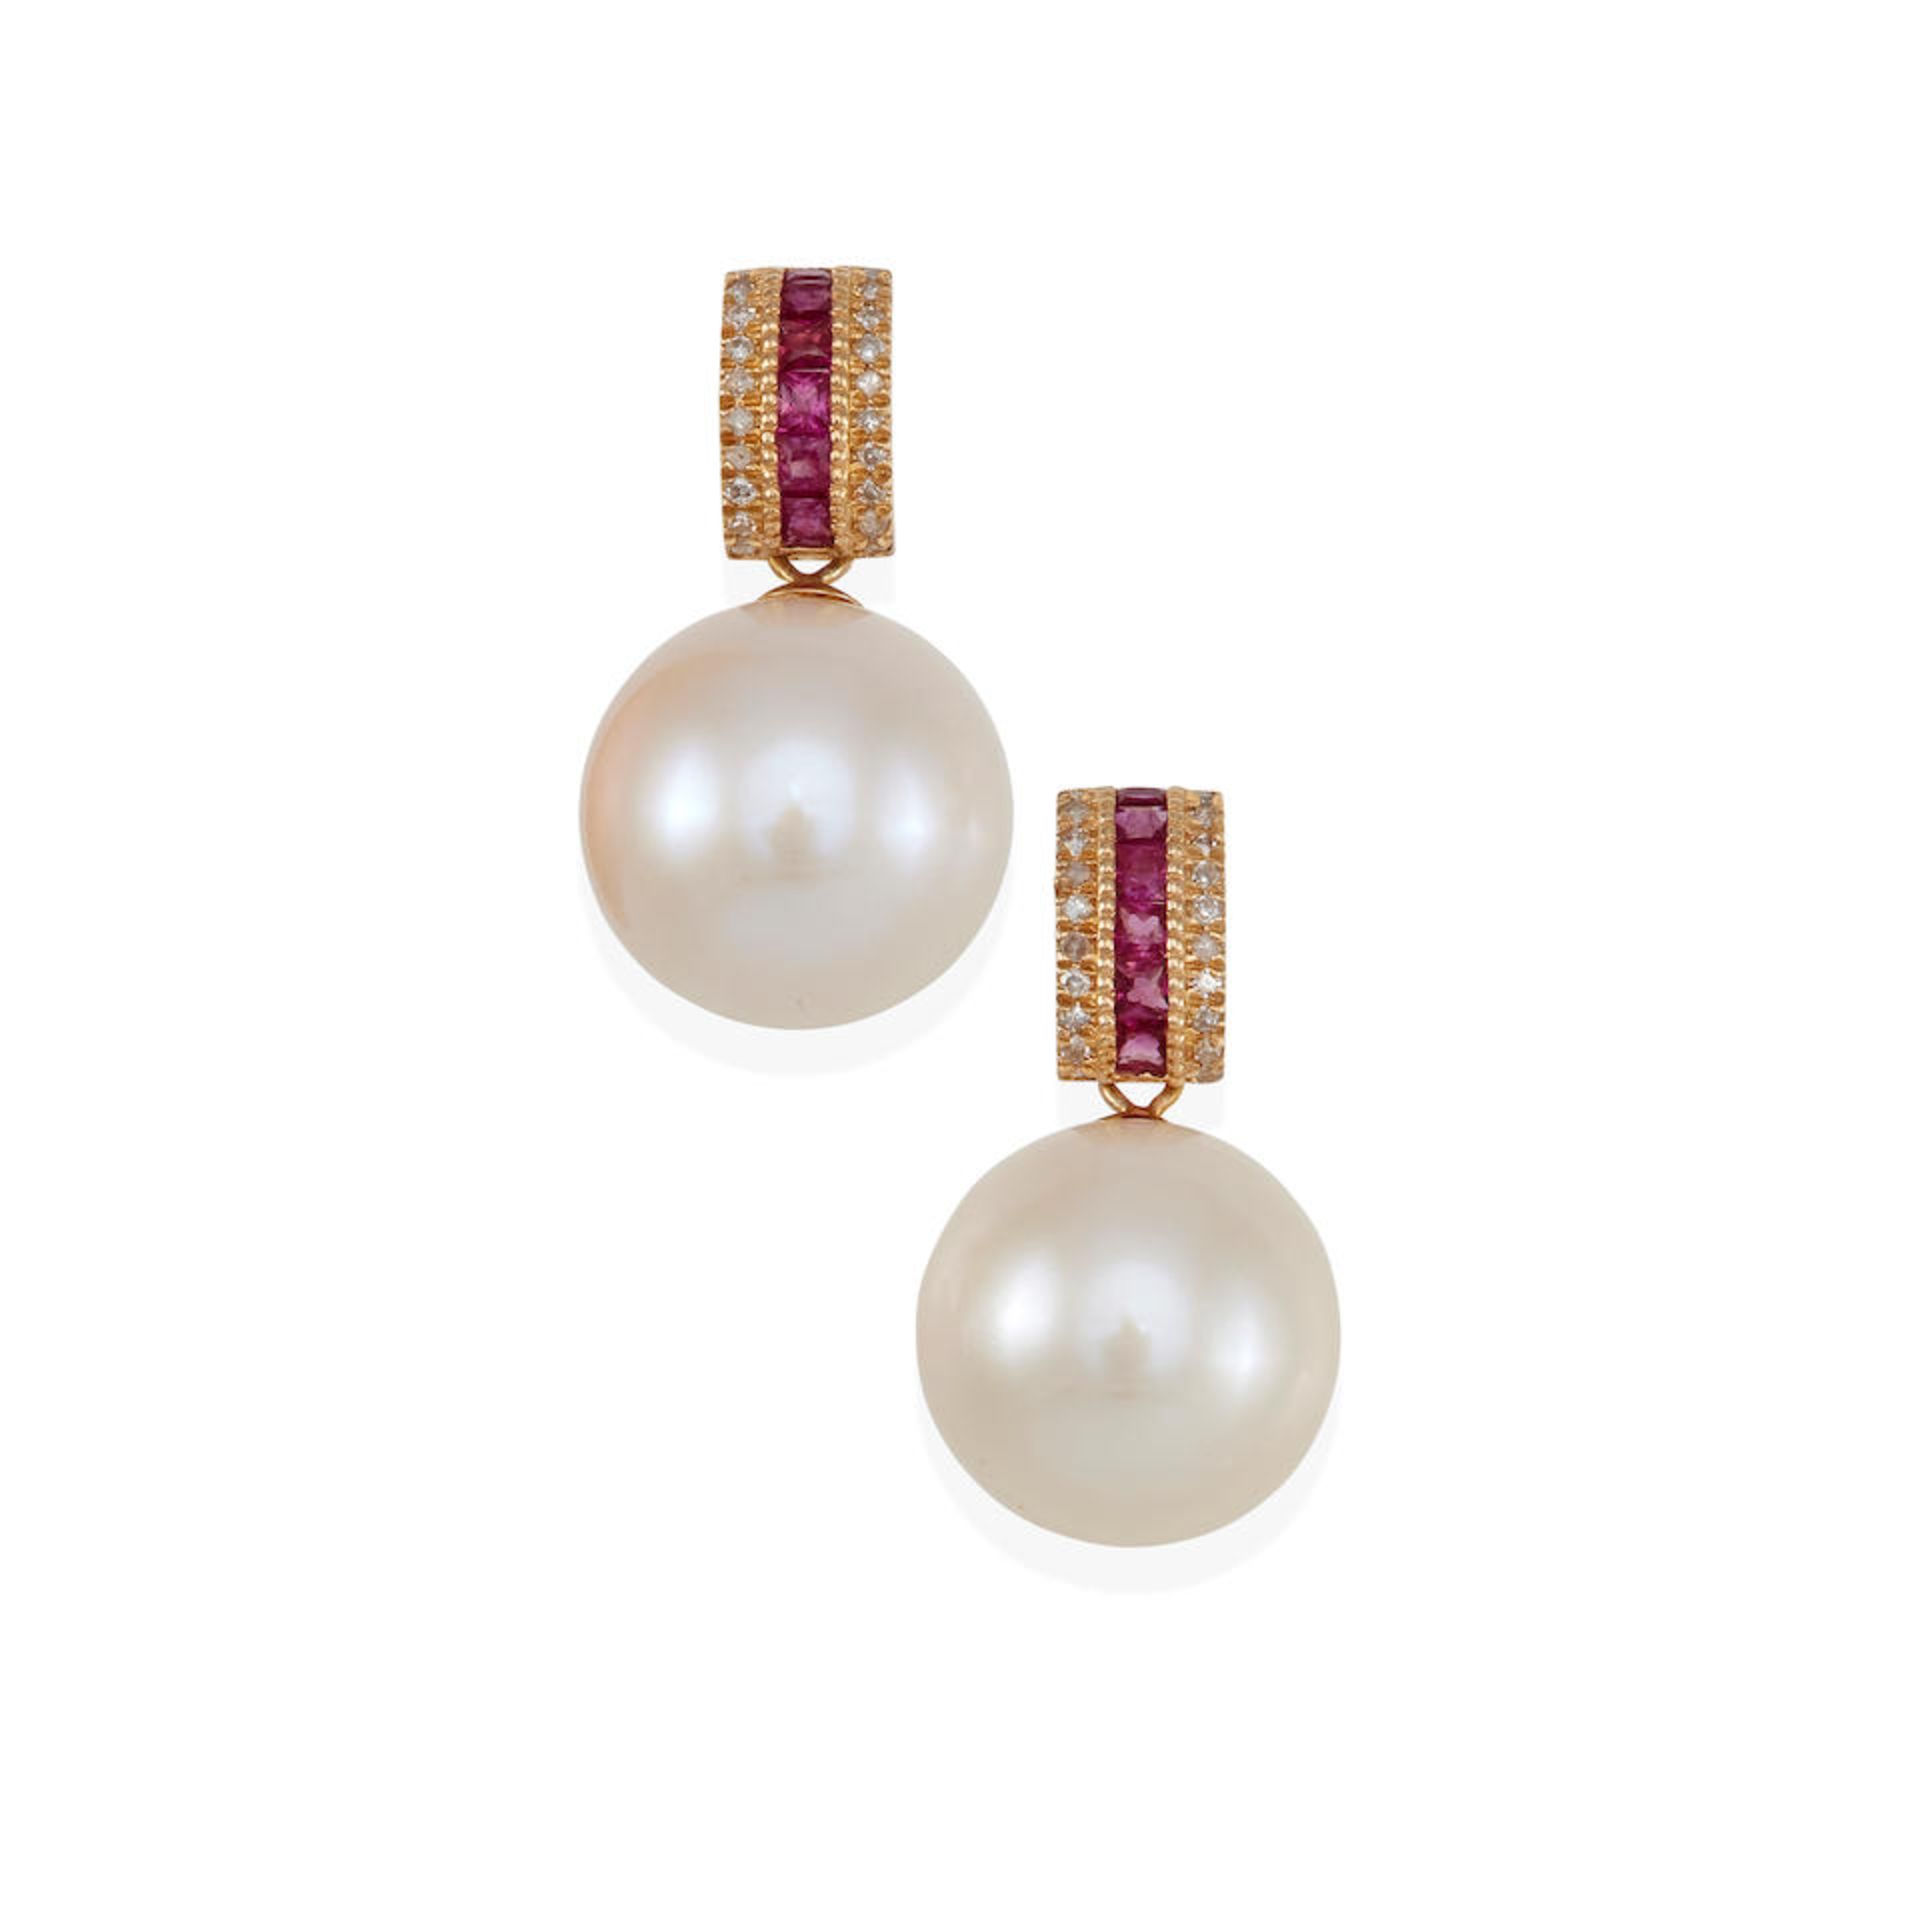 A PAIR OF 18K GOLD, CULTURED PEARL, RUBY AND DIAMOND EARRINGS